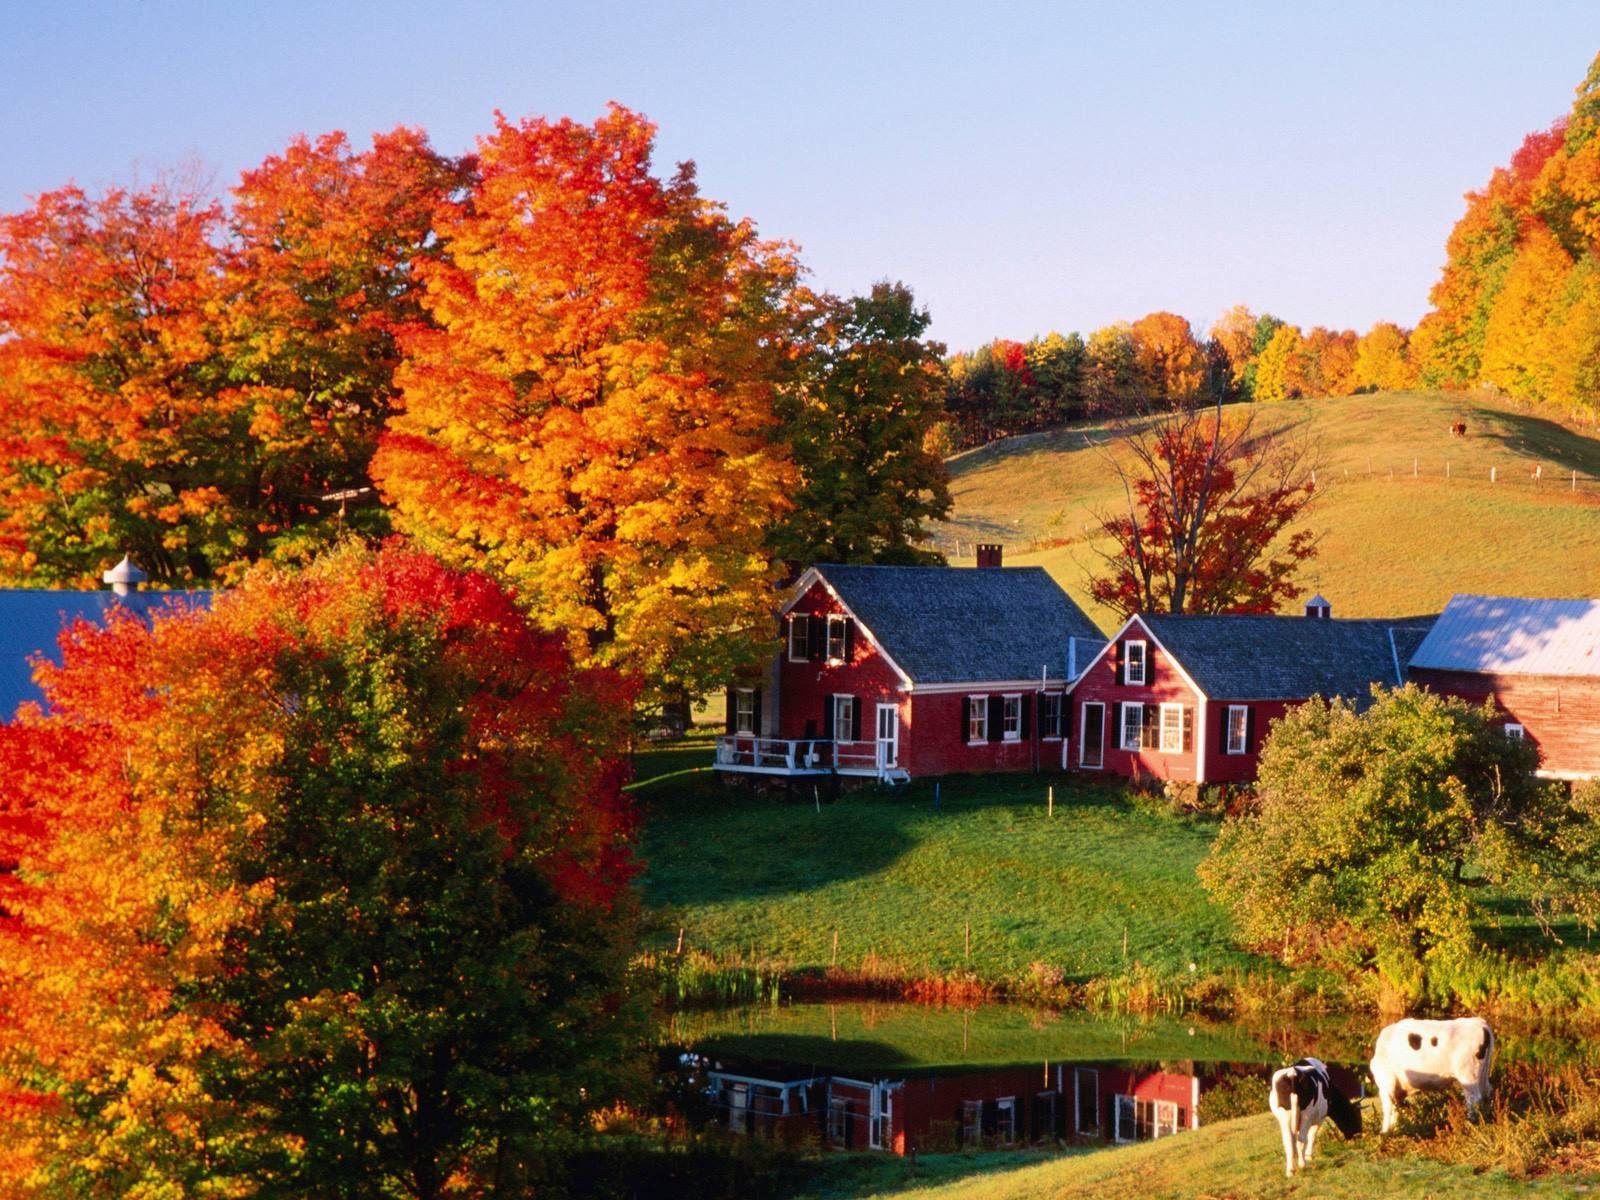 Autumn in Vermont, New England. Vermont farms, Fall desktop background, Country barns